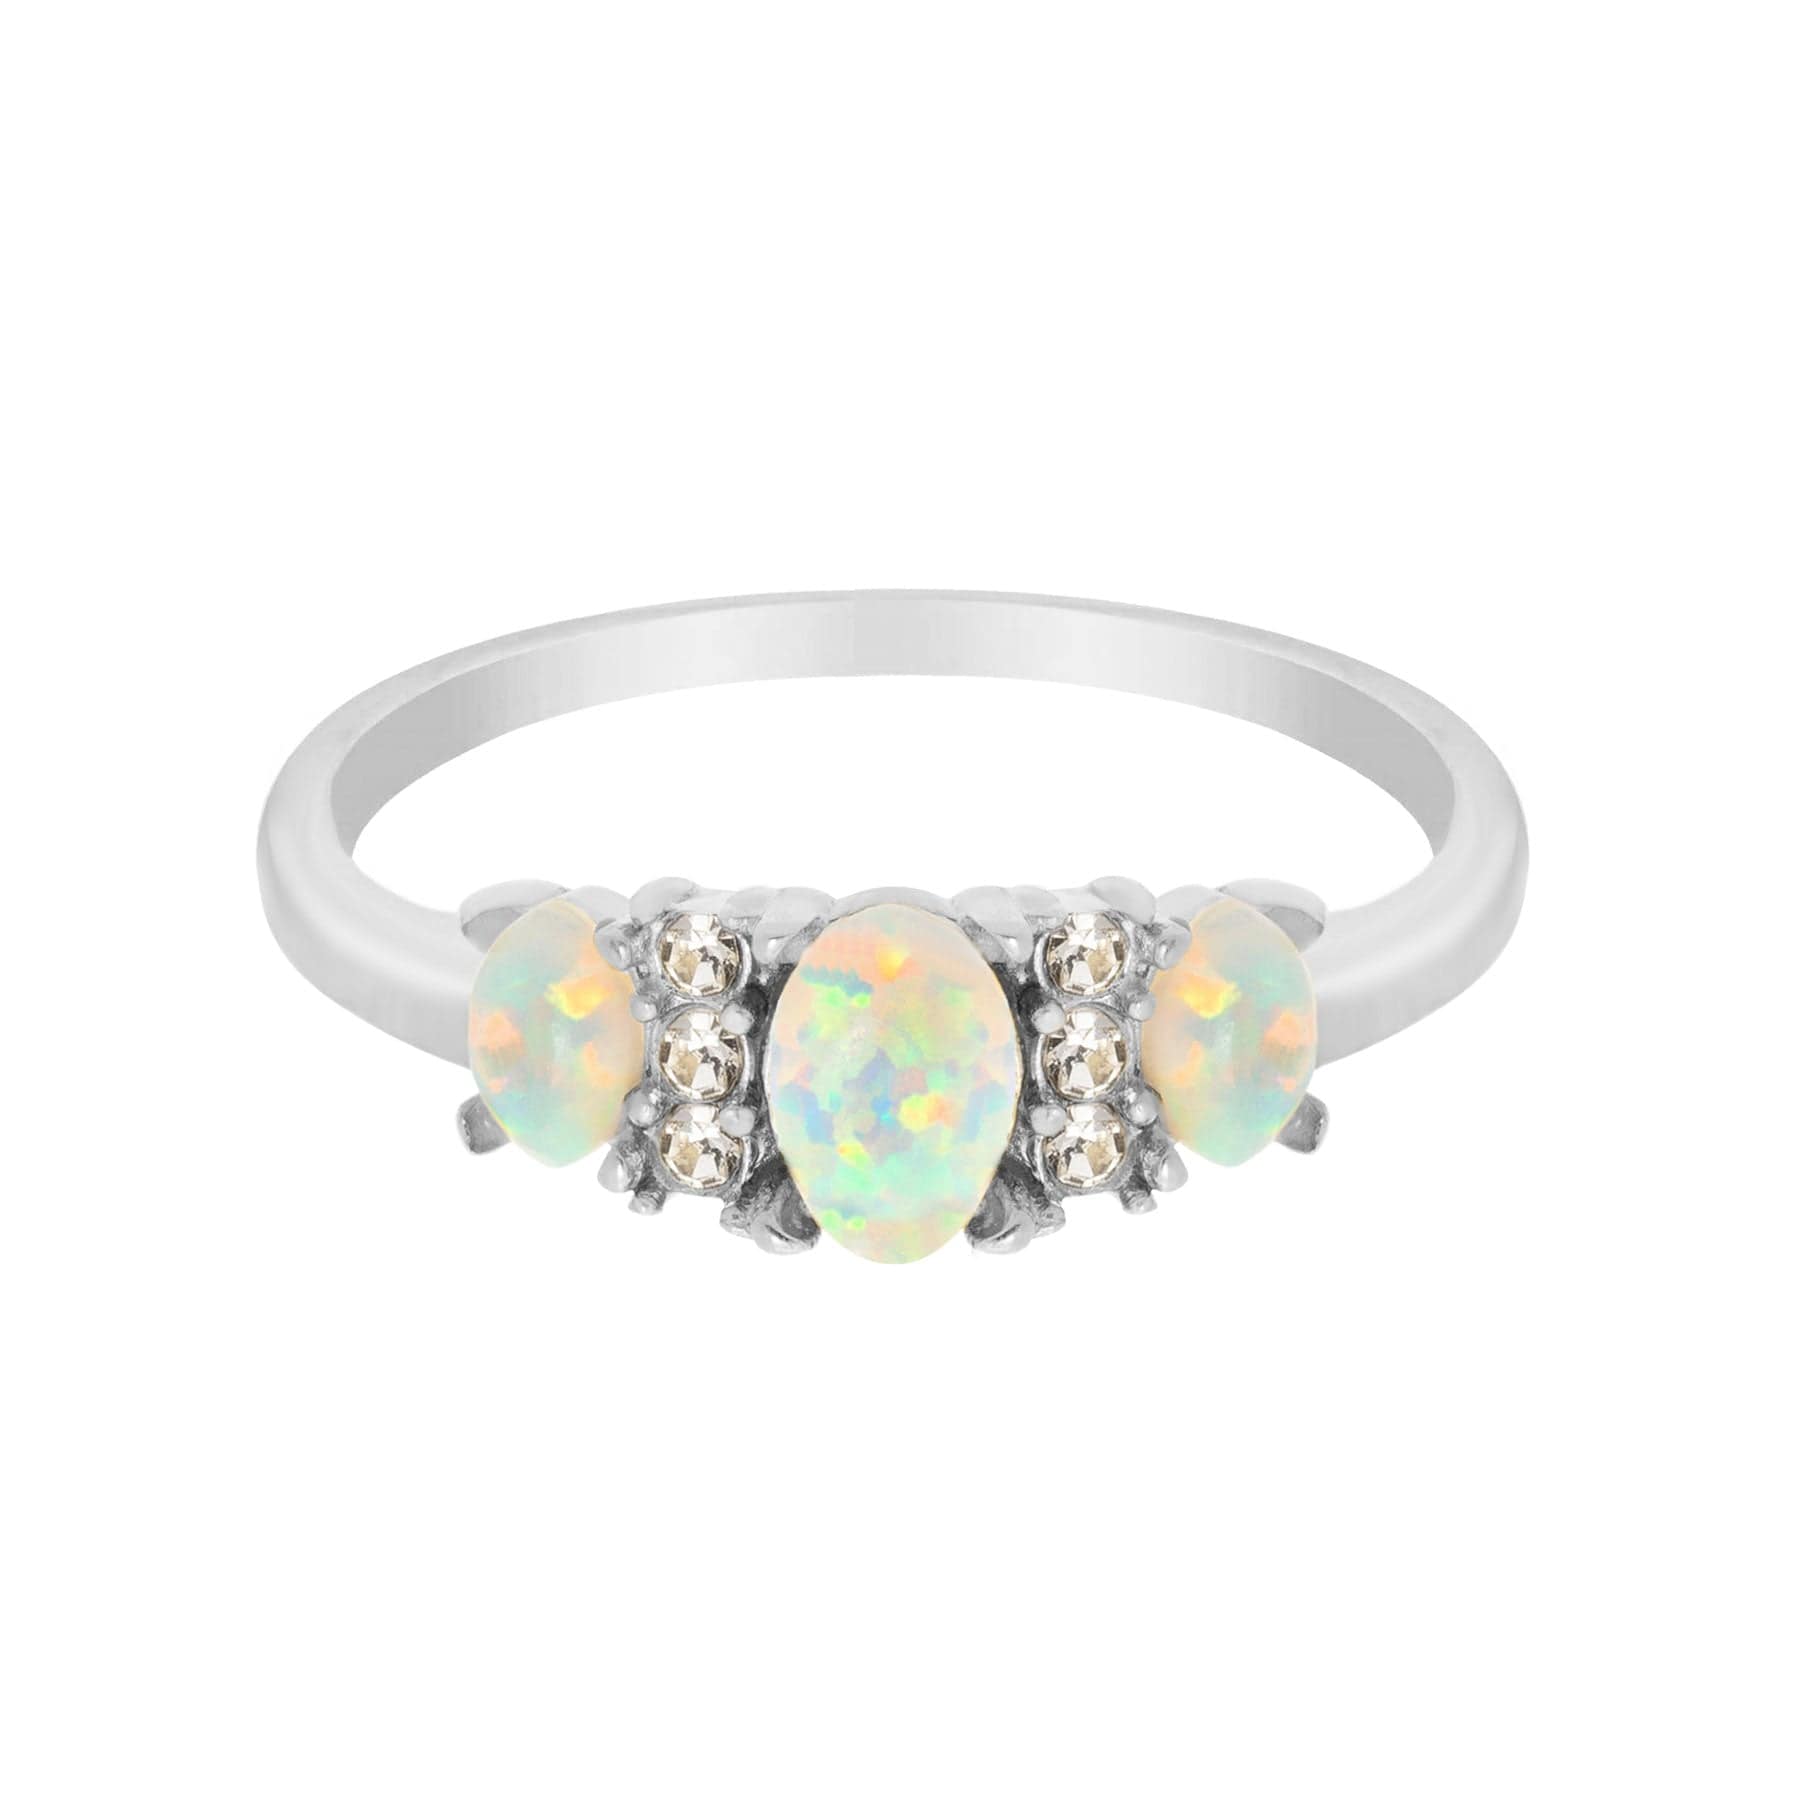 BohoMoon Stainless Steel Lumi Opal Ring Silver / US 6 / UK L / EUR 51 (small)